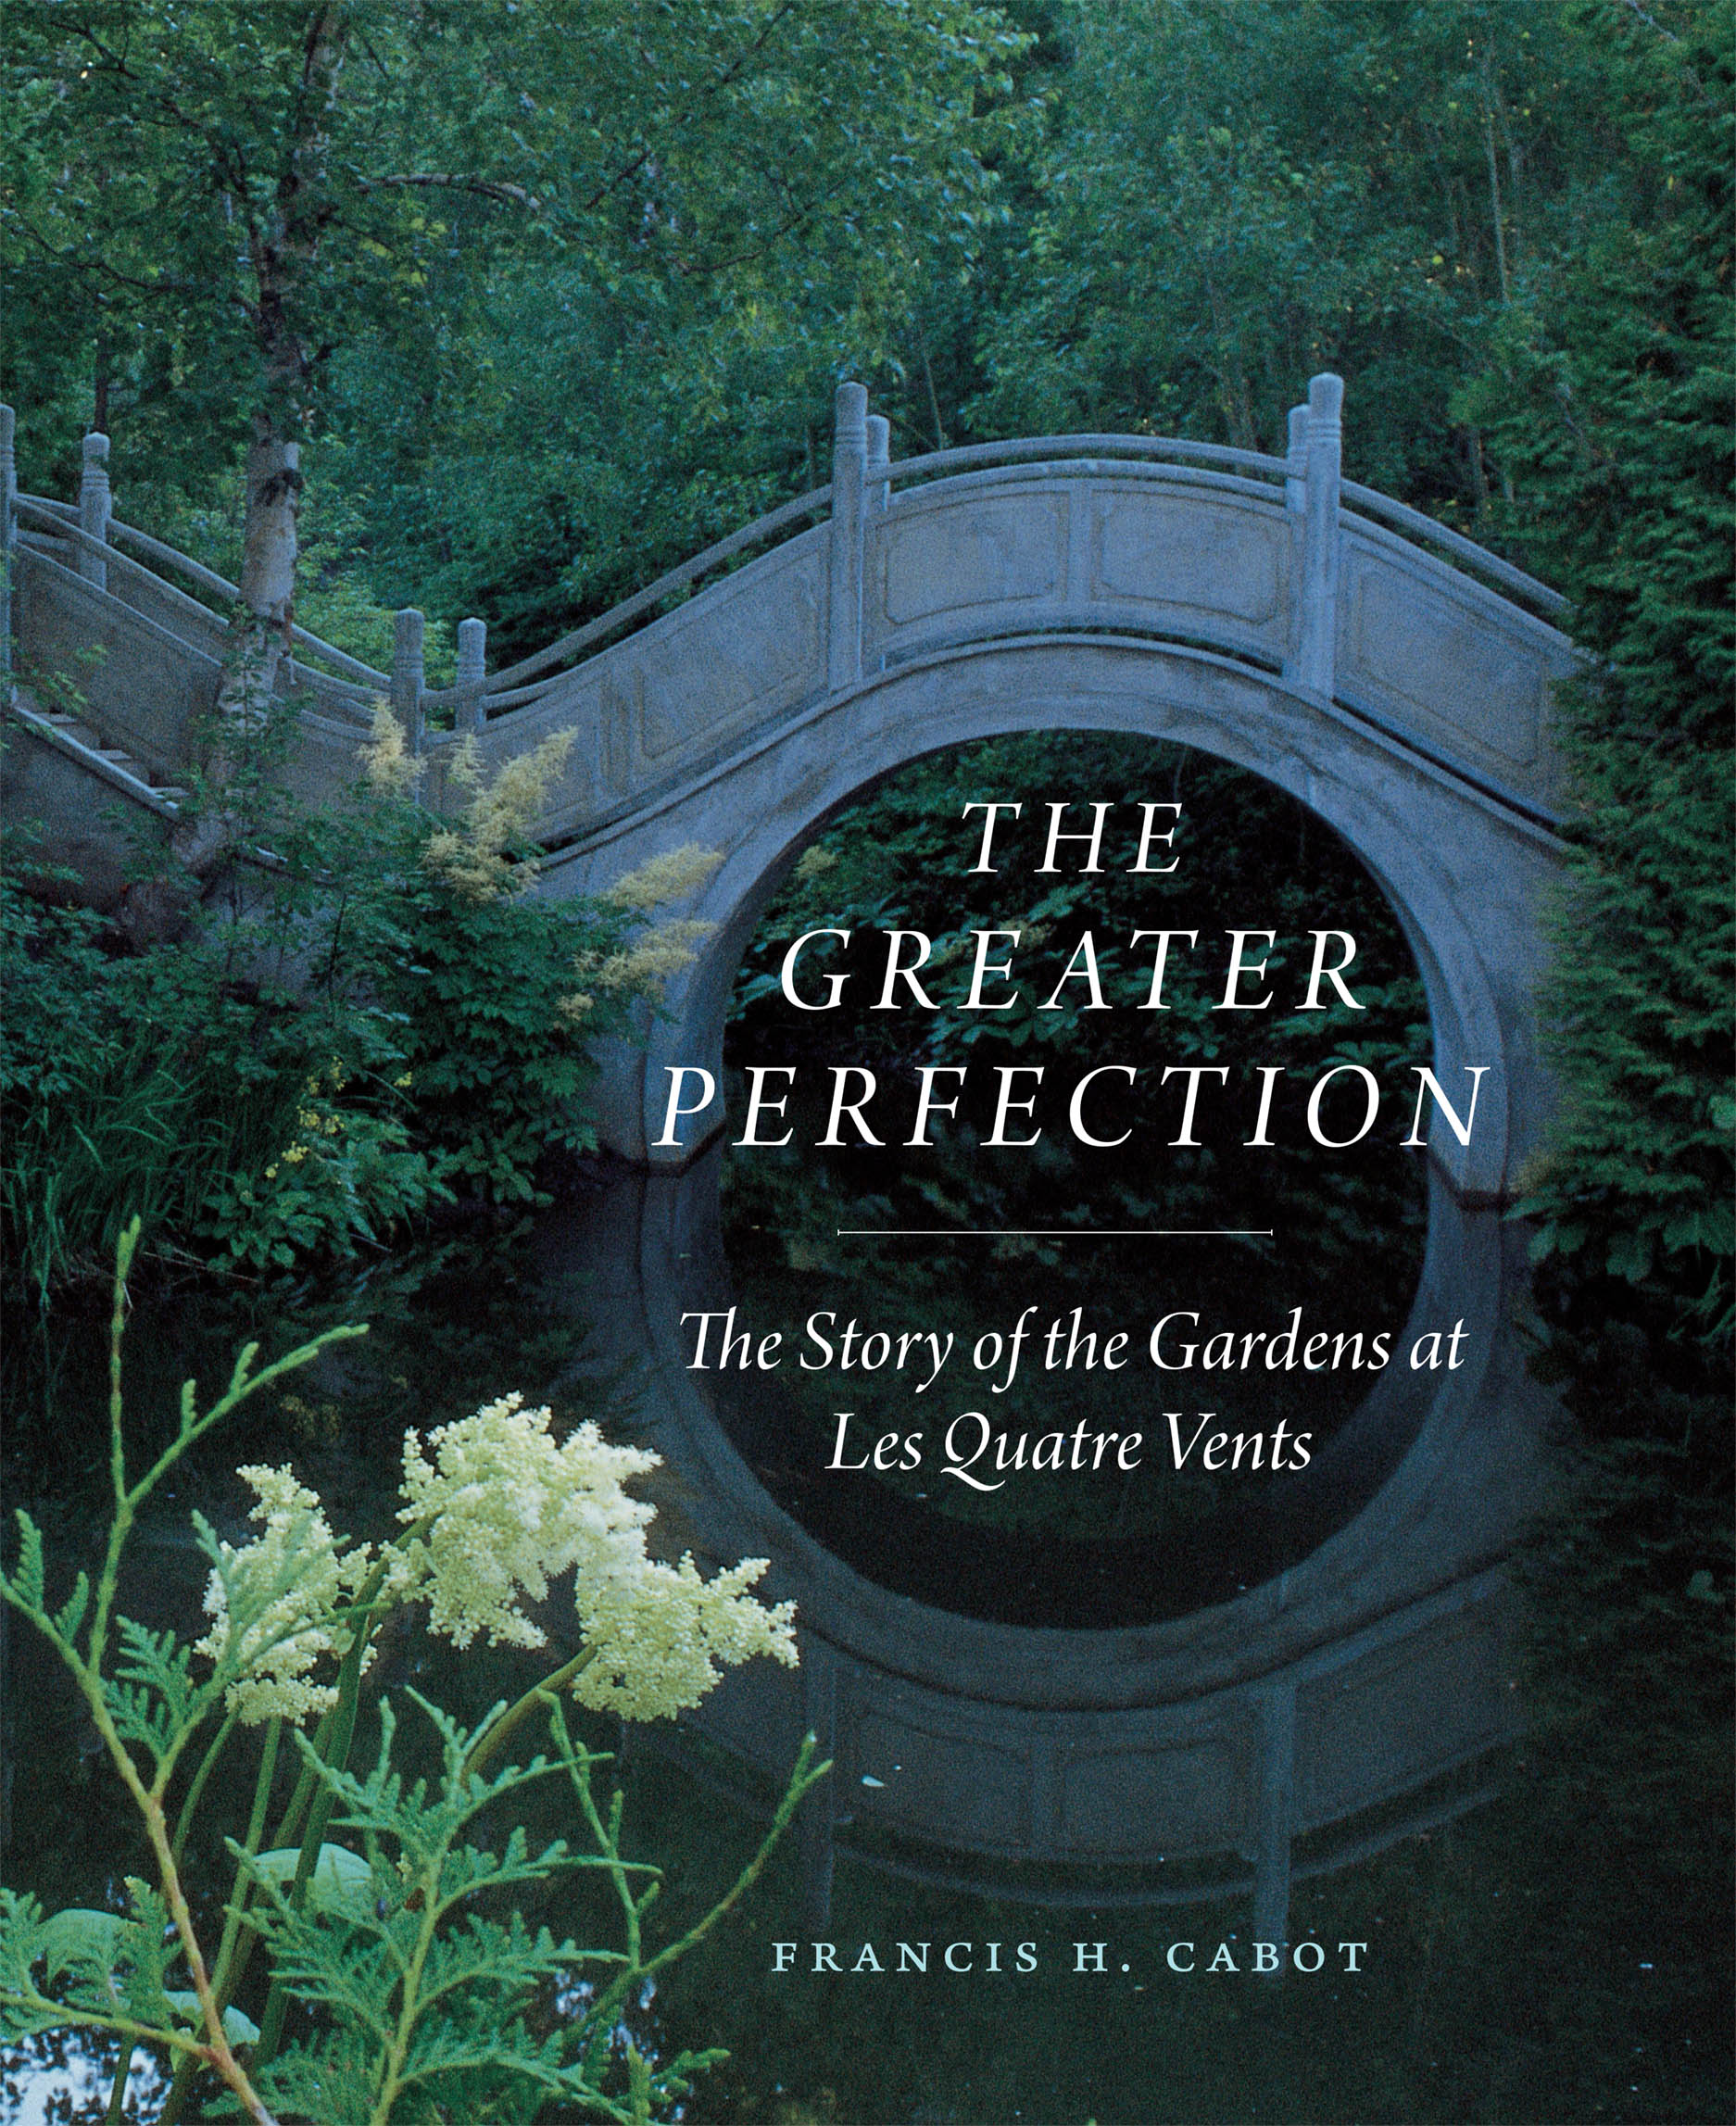 The Greater Perfection The Story of the Gardens at Les Quatre Vents